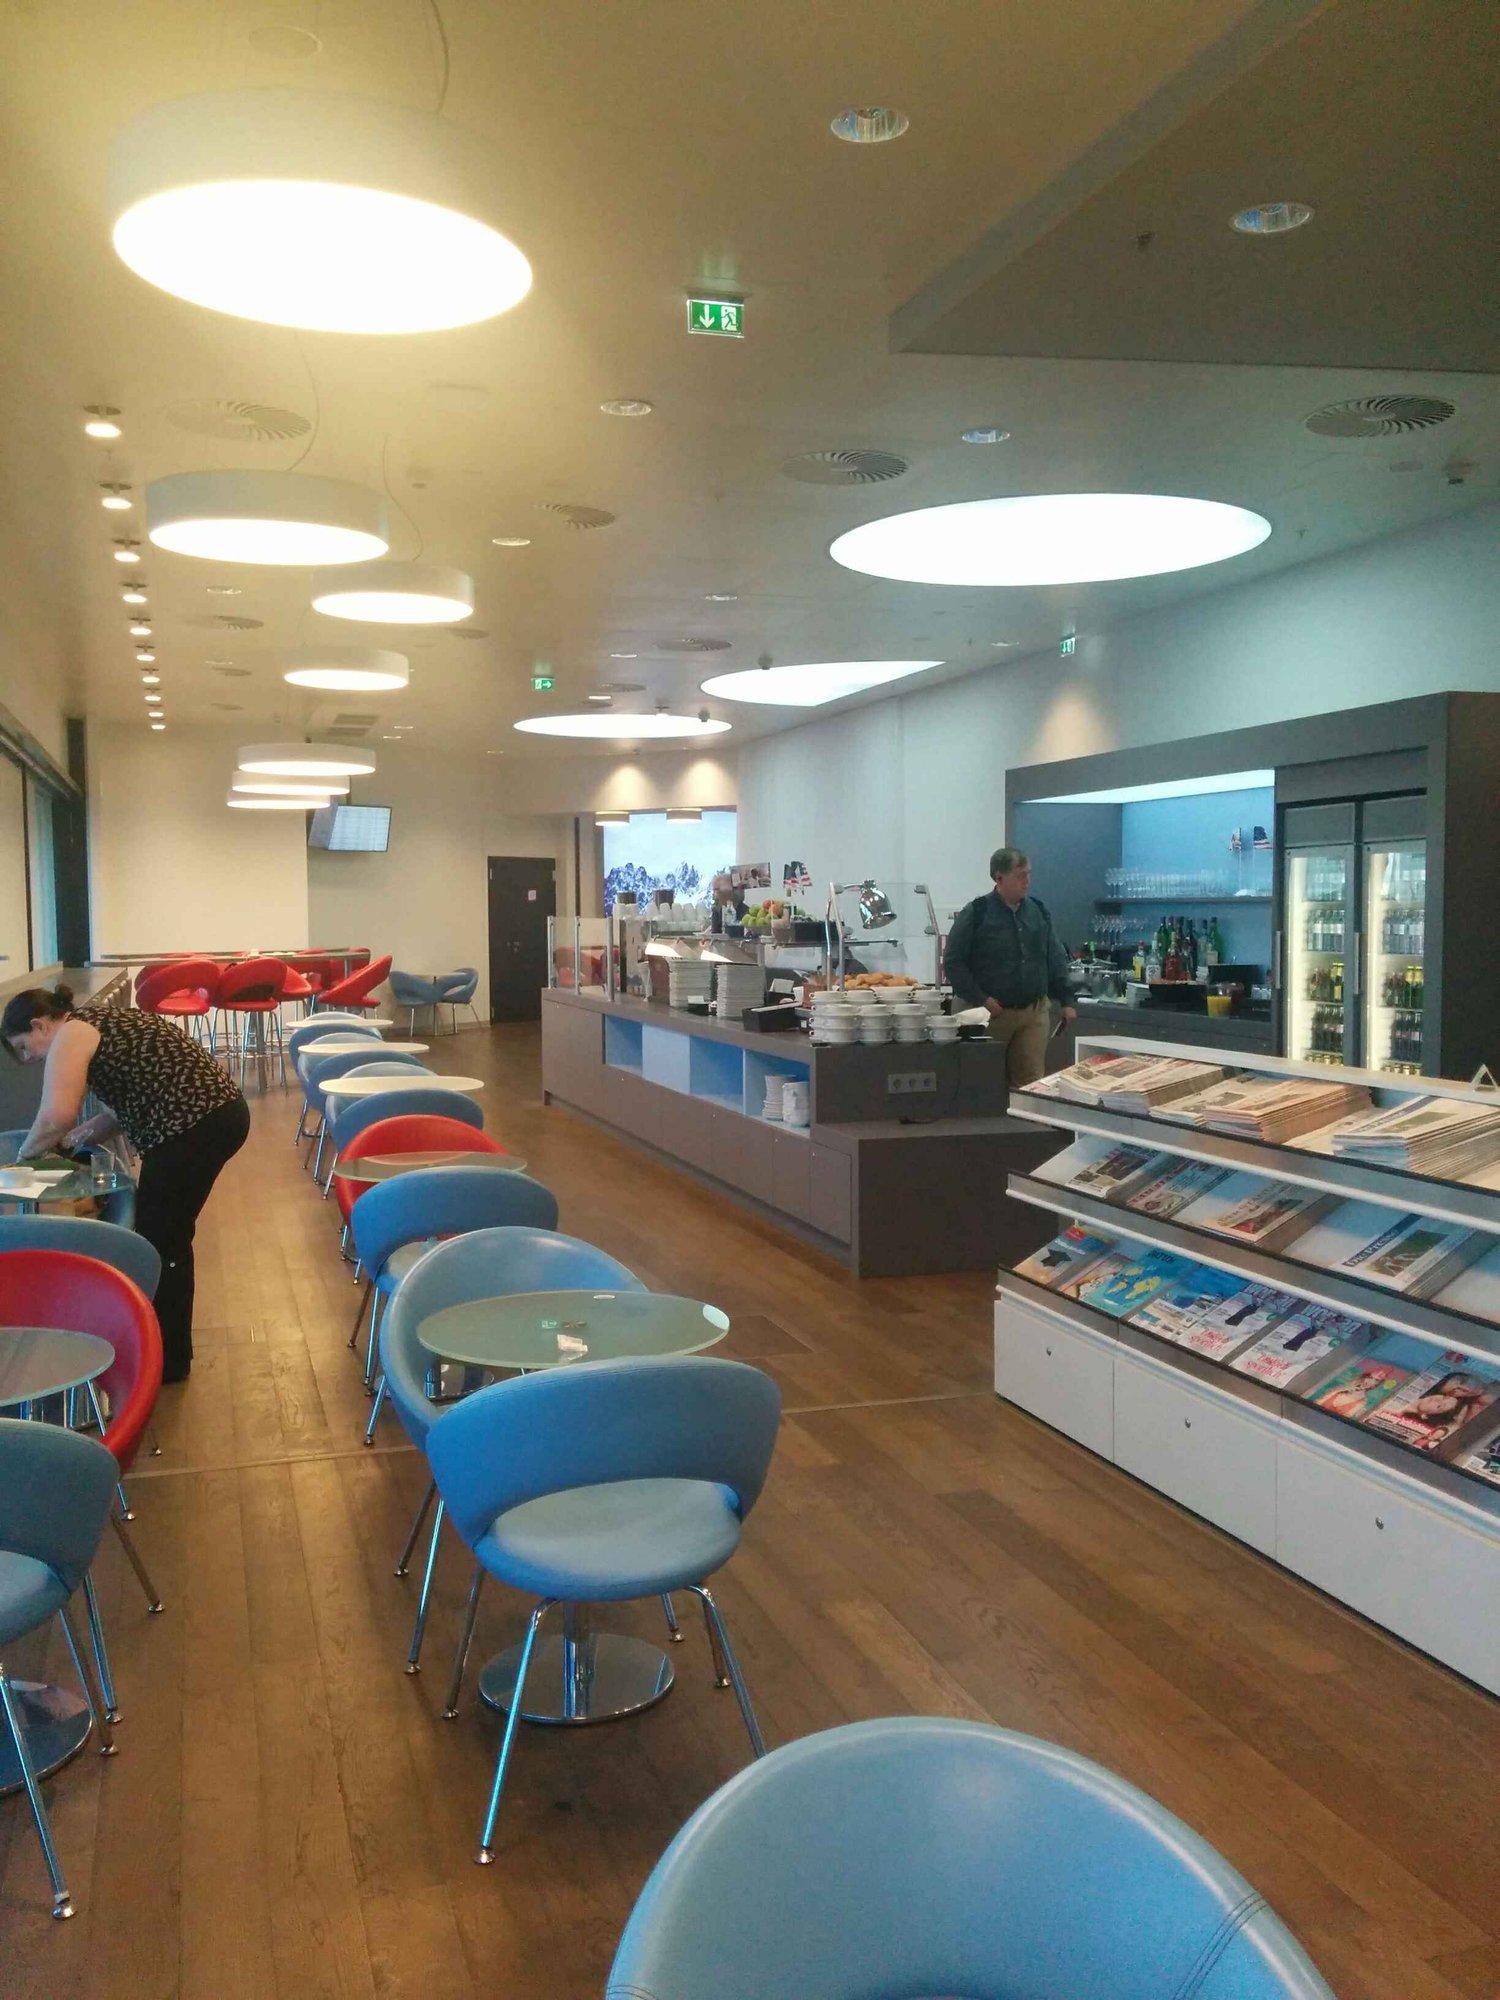 Austrian Airlines Business Lounge image 1 of 5